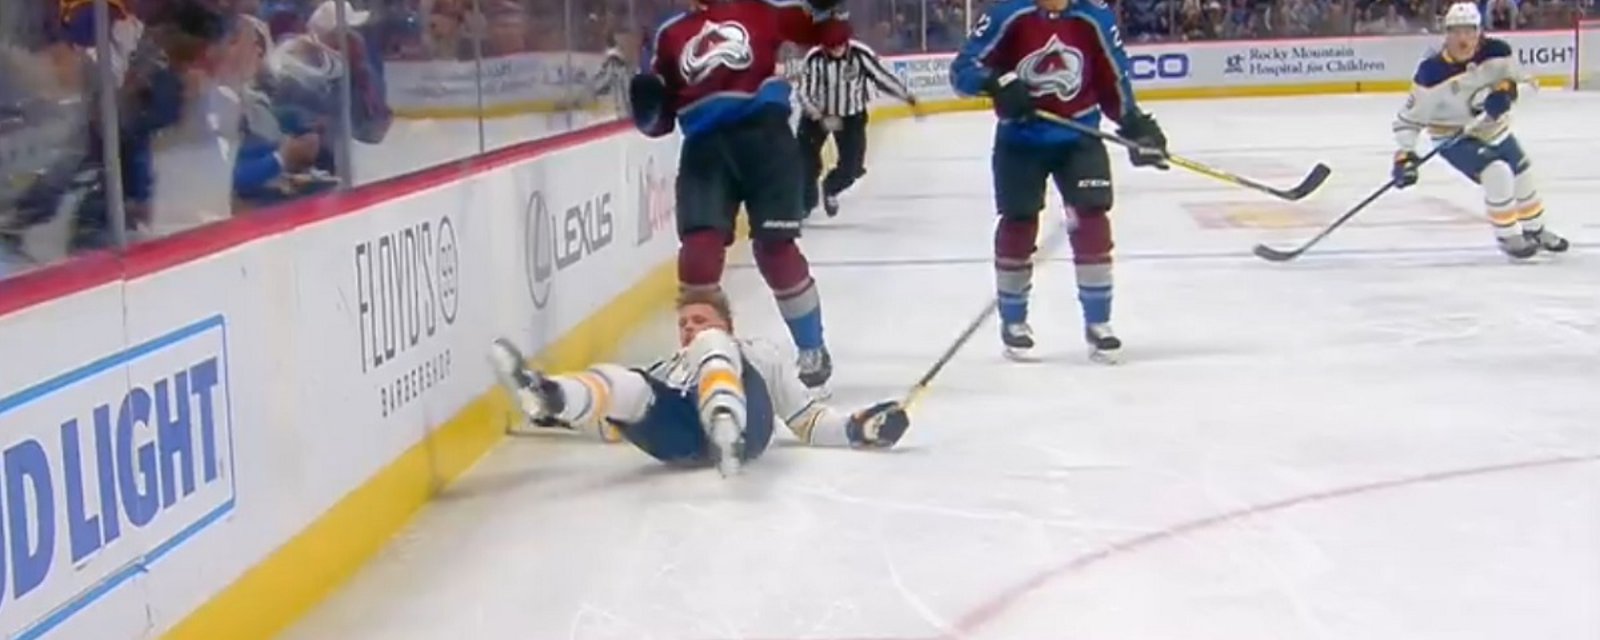 Zadorov levels Jack Eichel after the whistle has blown.